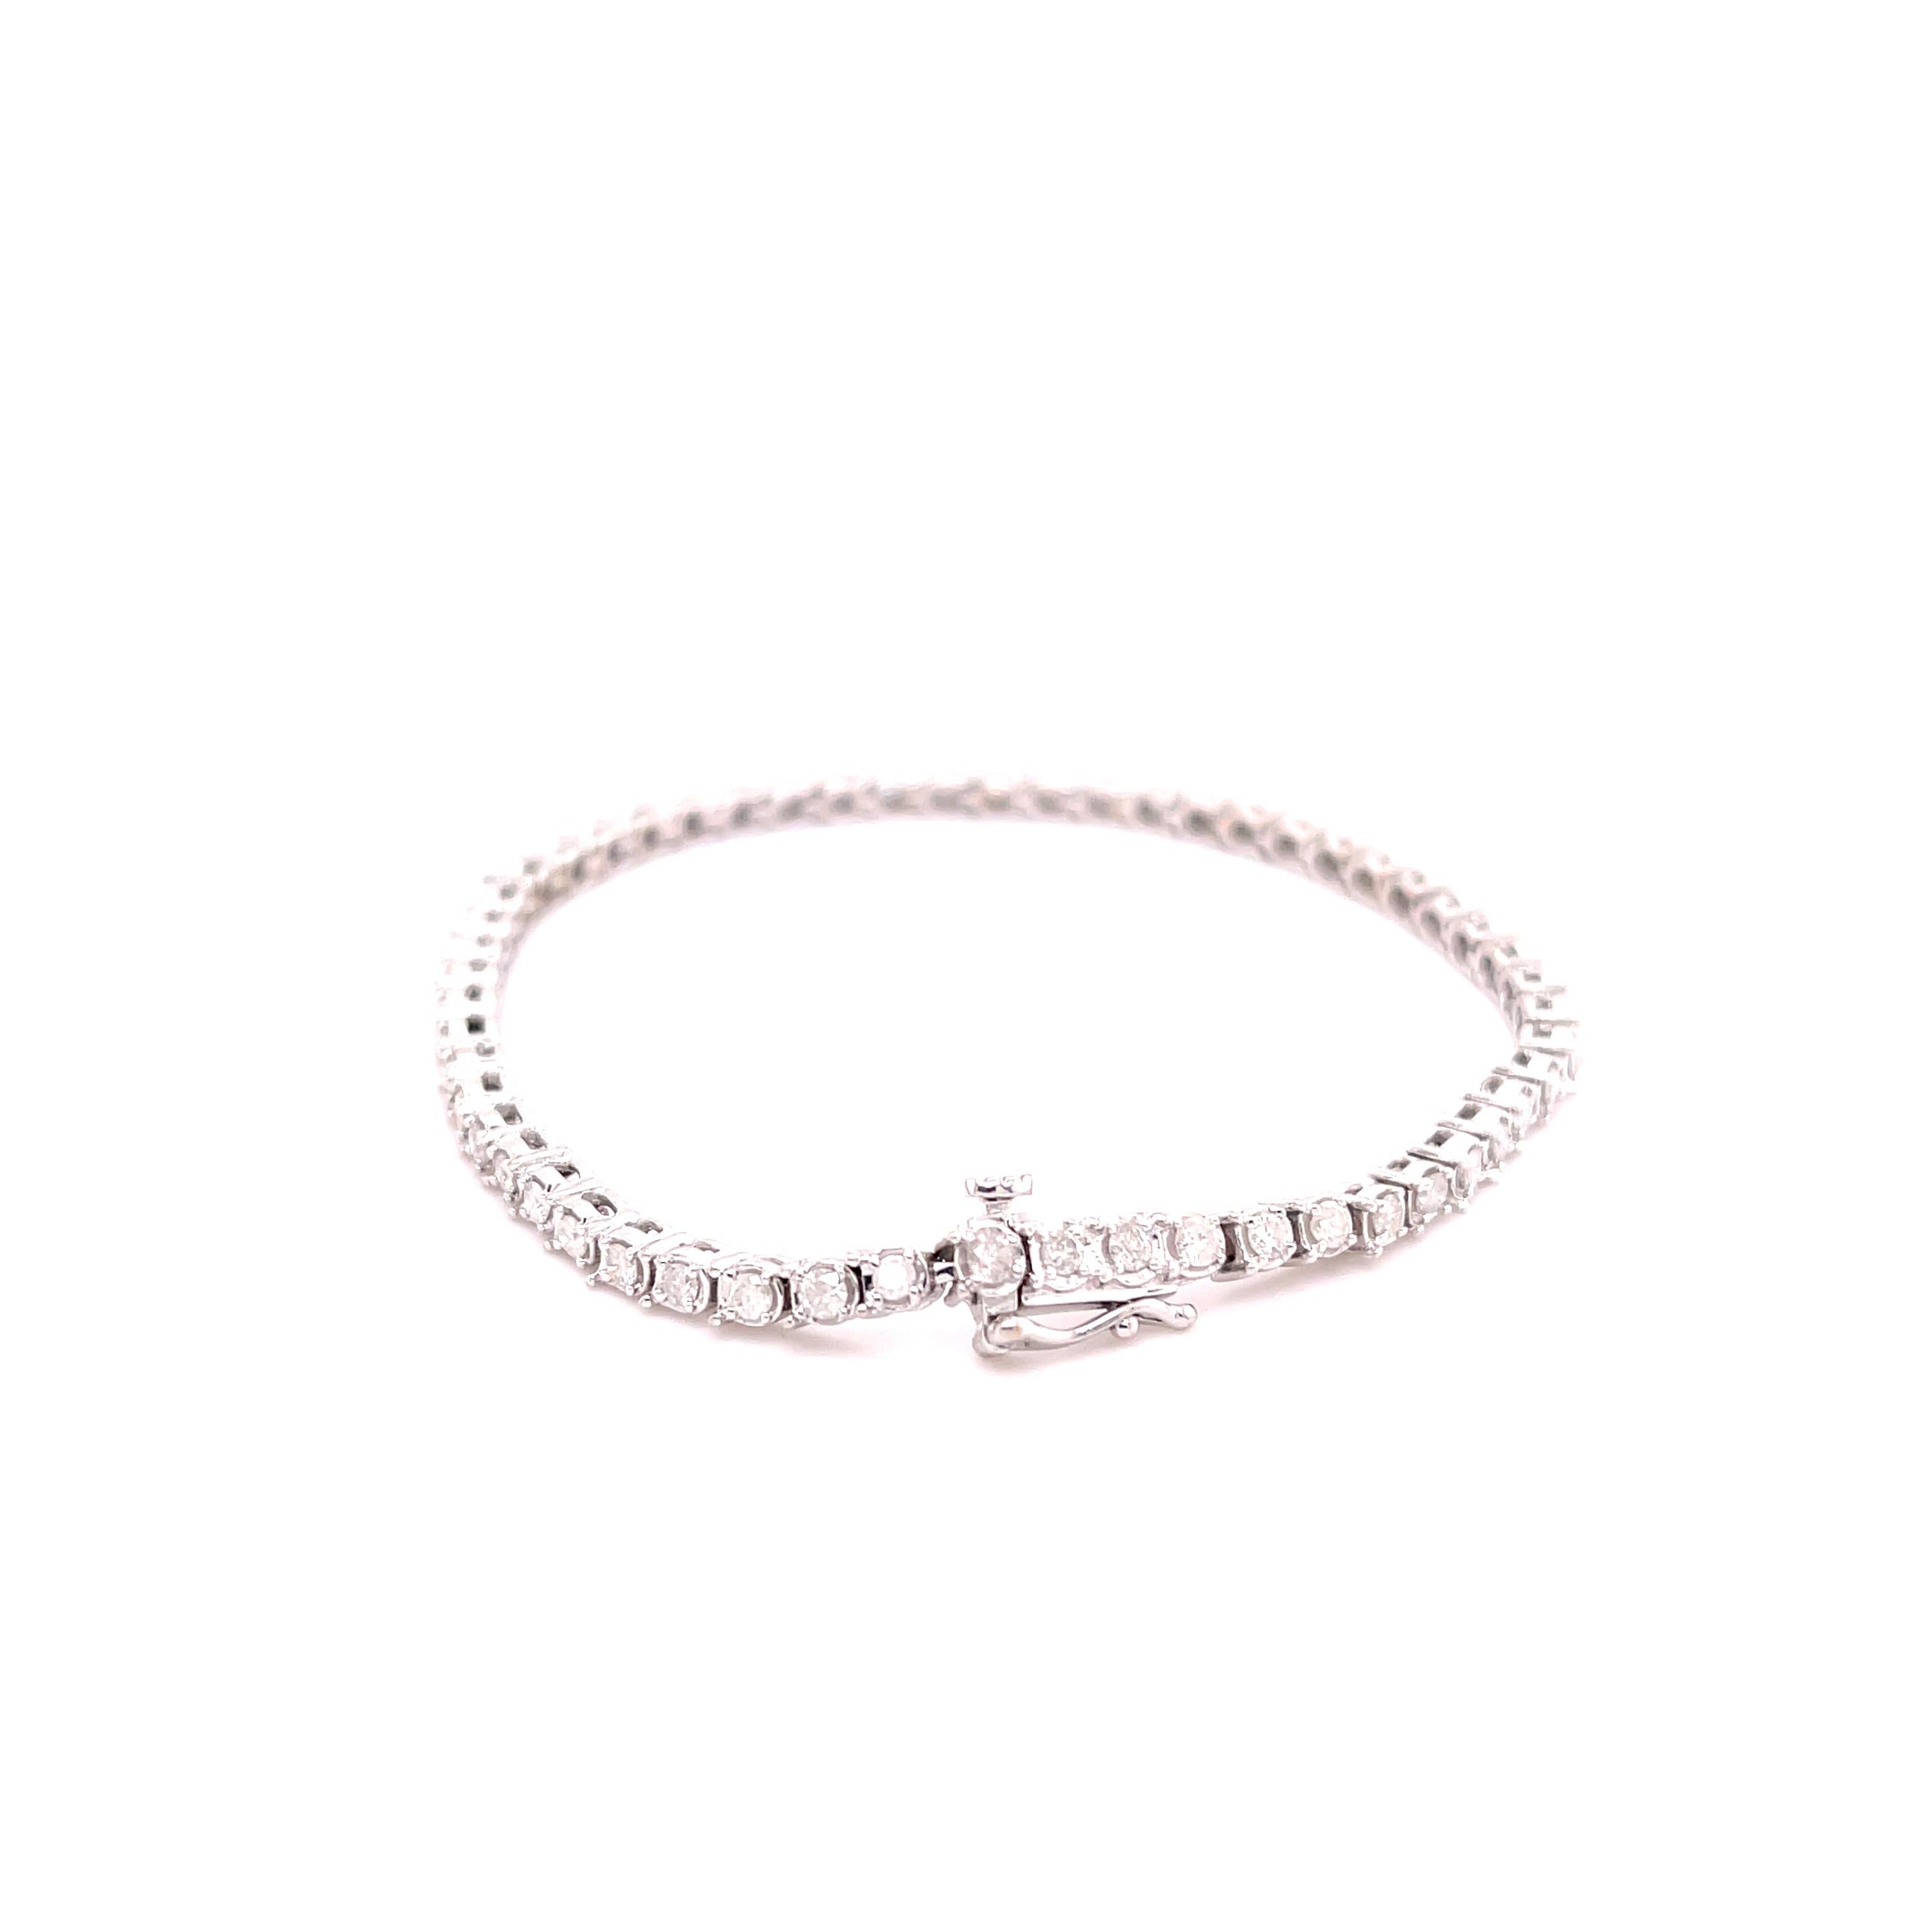 One lady's custom made polished rhodium plated 10K white gold, diamond tennis bracelet. The bracelet measures approximately 7.00 inches in length by 2.70mm in diameter and weighs a total of 9.80 grams. Stamped 